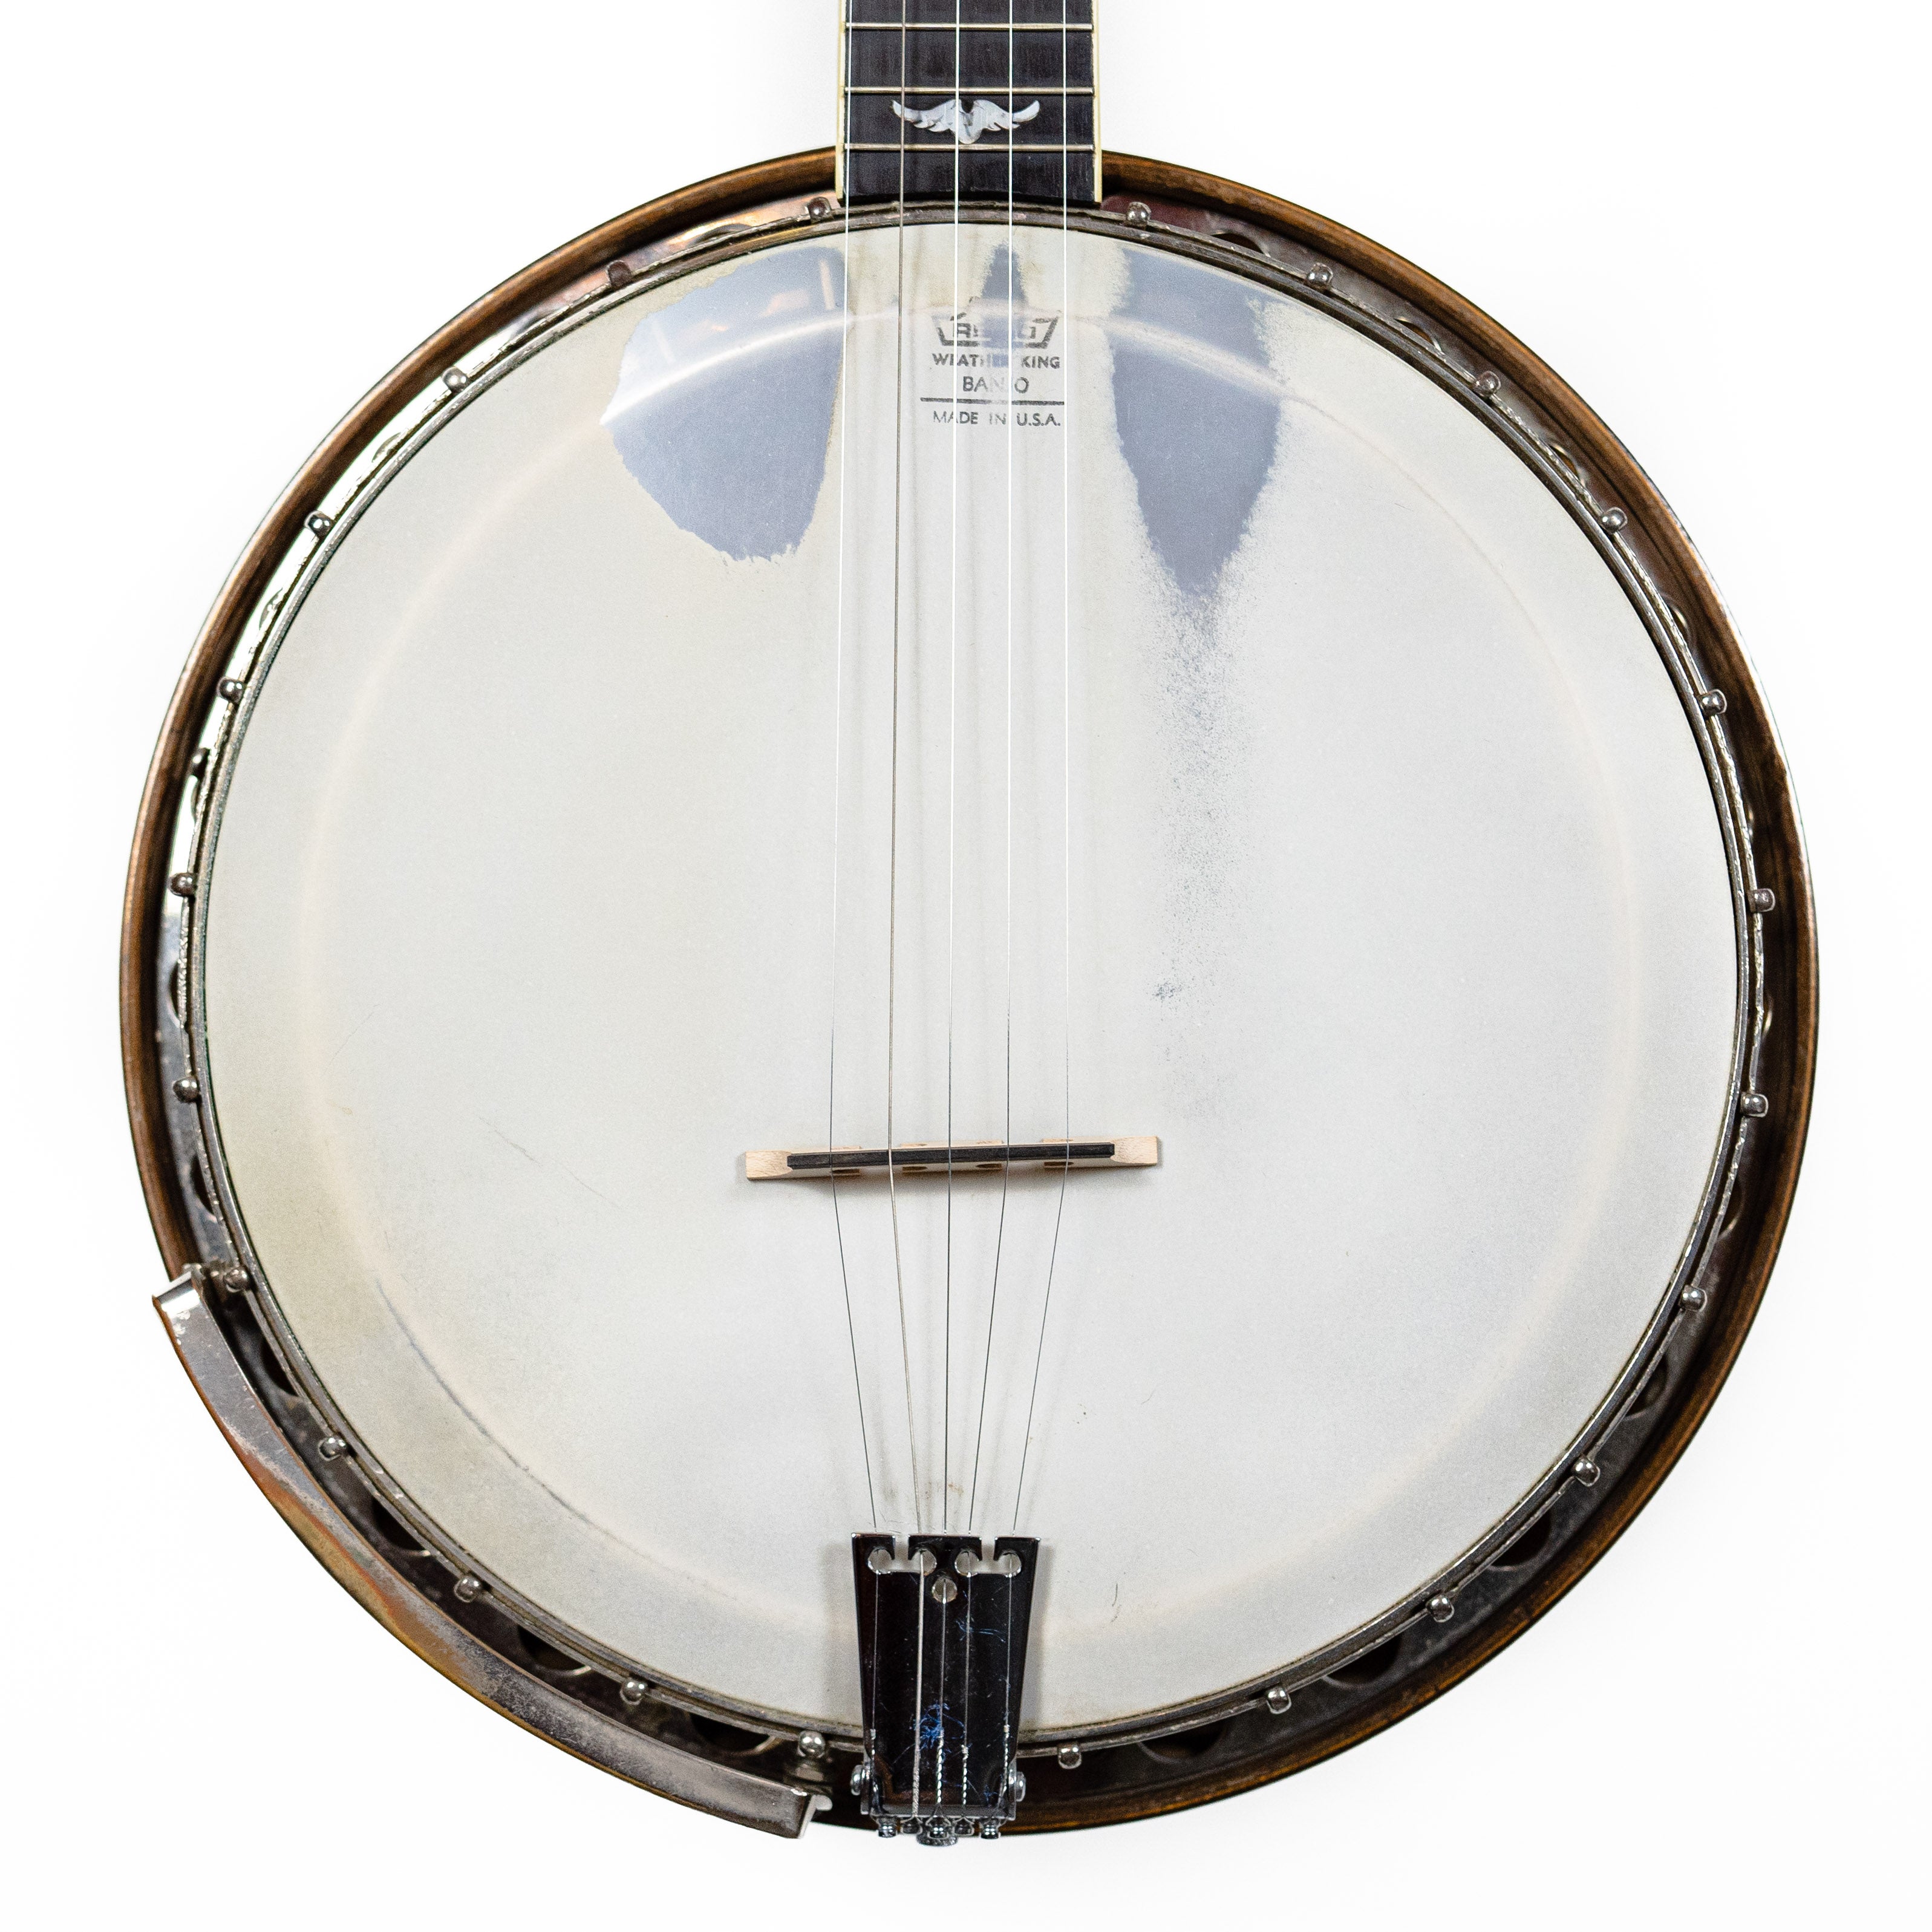 Paramount 1920s Banjo Converted to 5-string